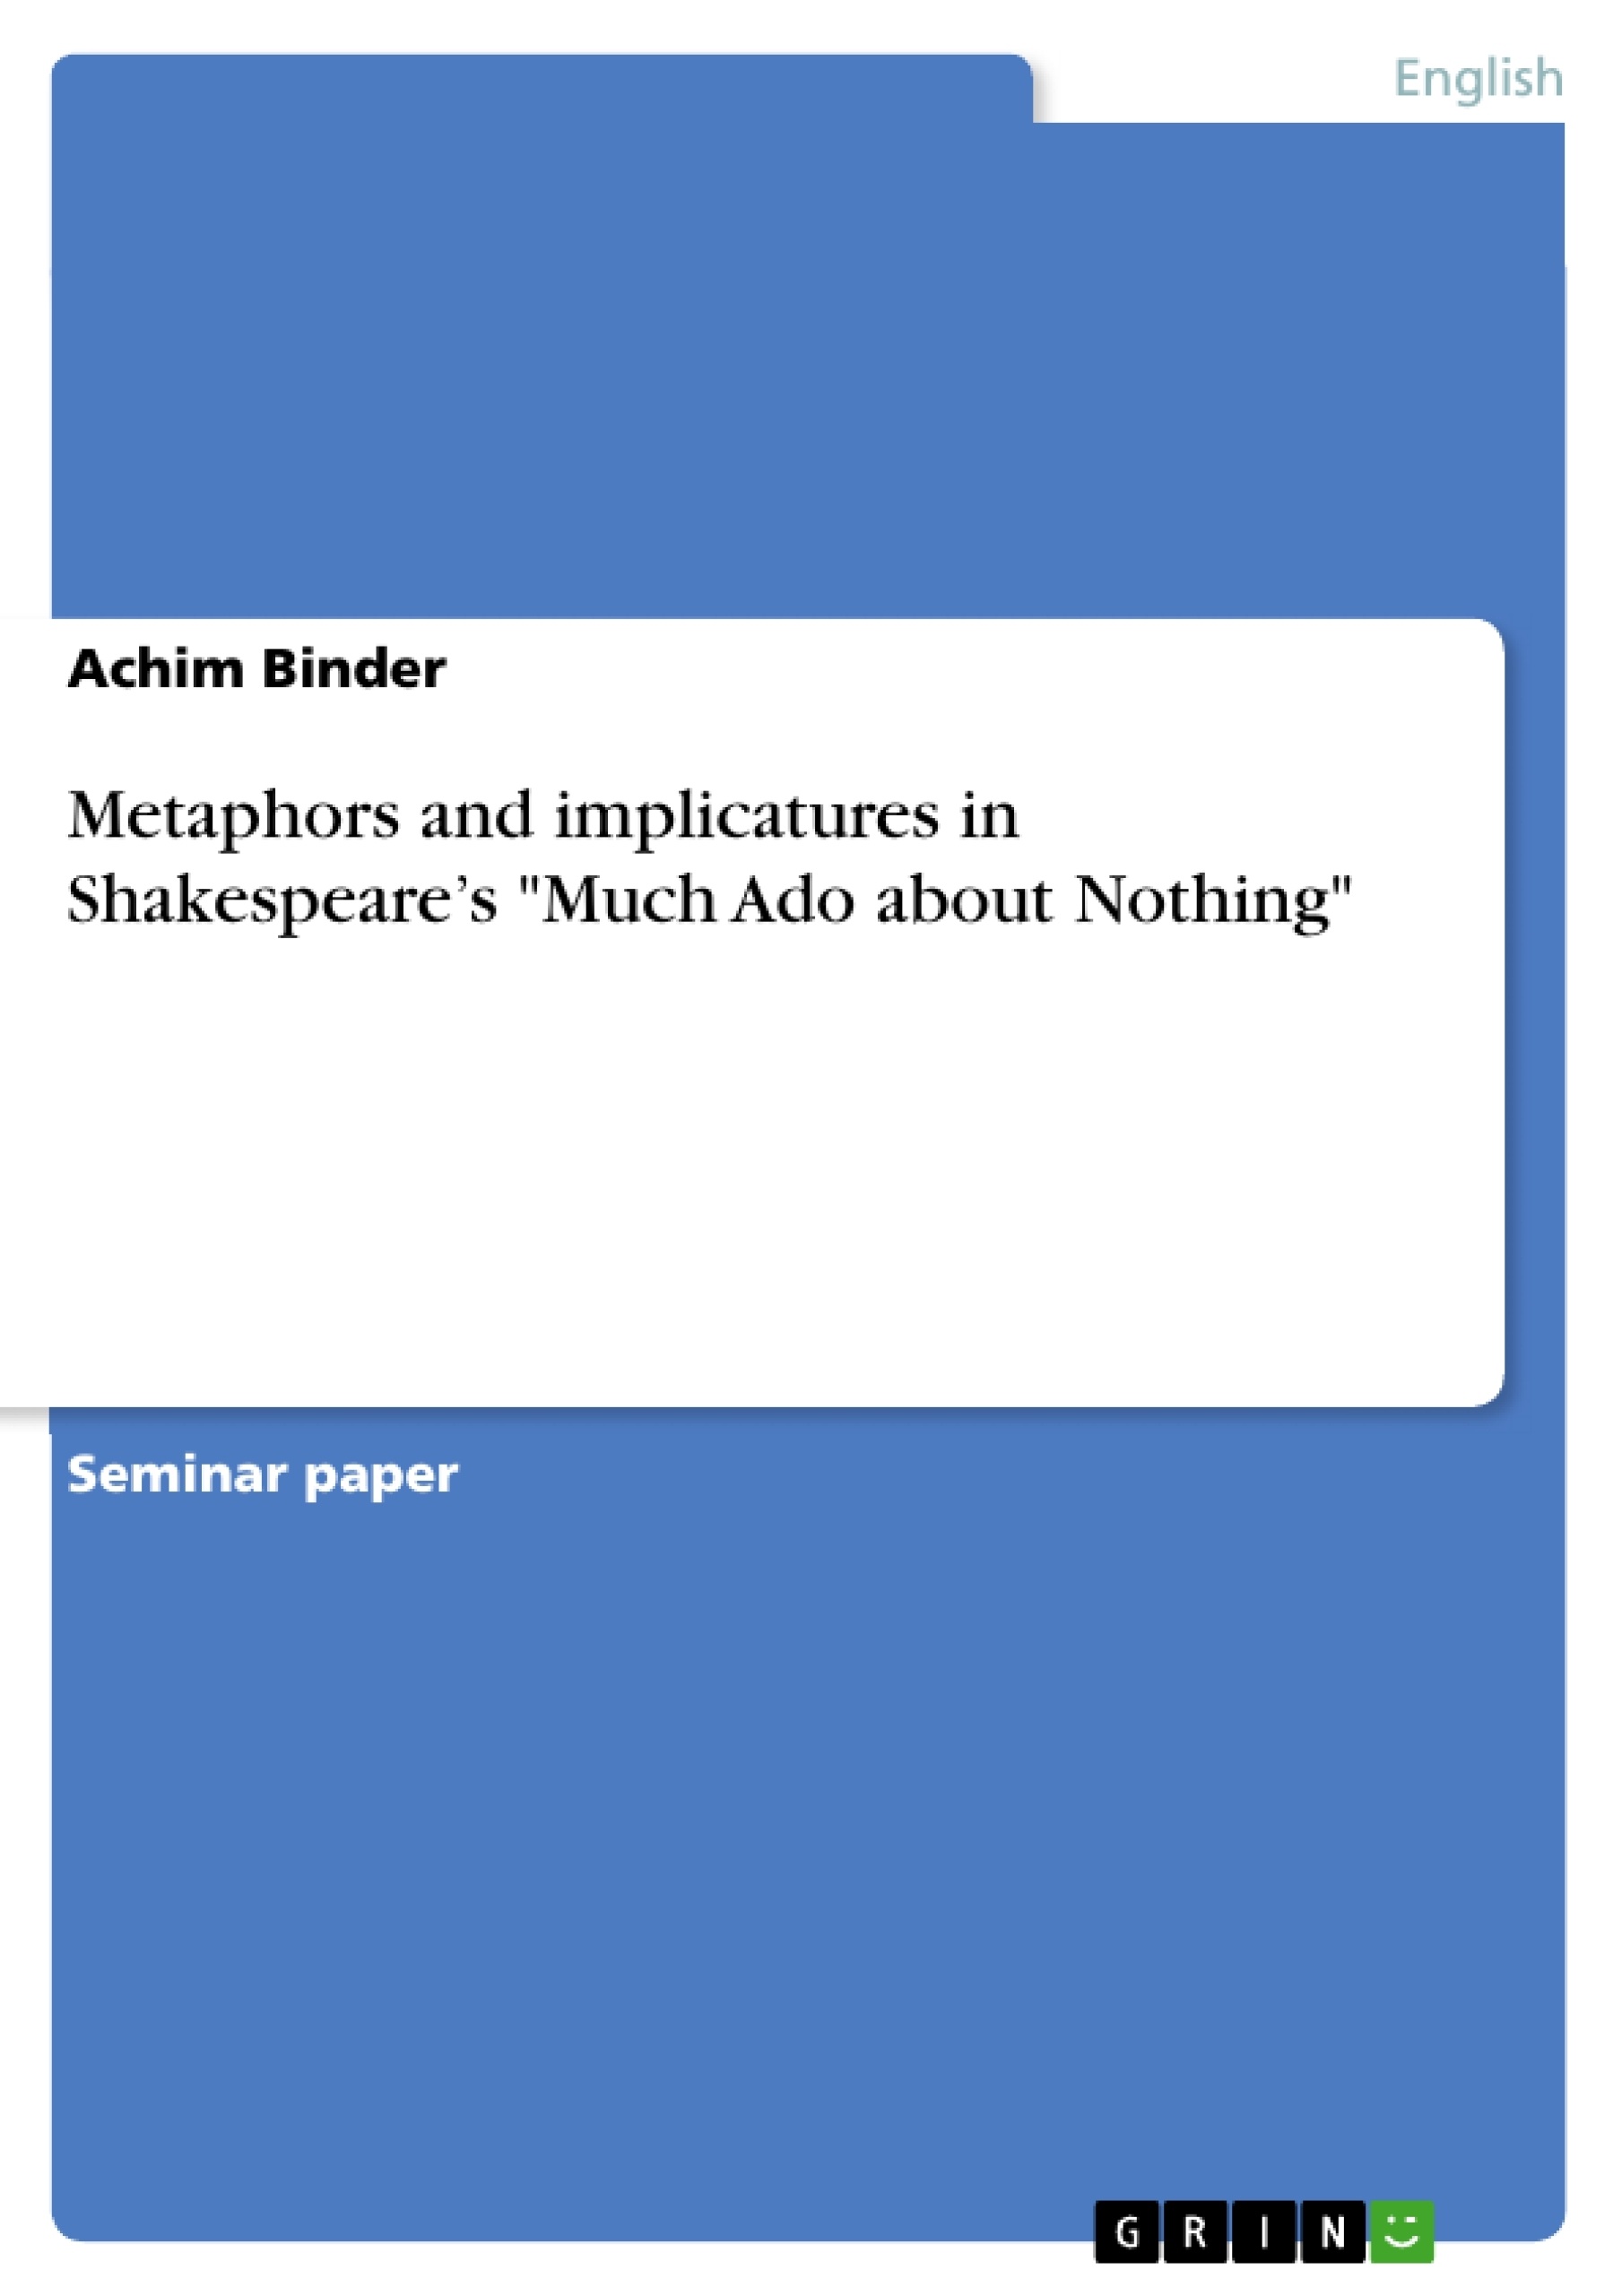 Titre: Metaphors and implicatures in Shakespeare’s "Much Ado about Nothing"